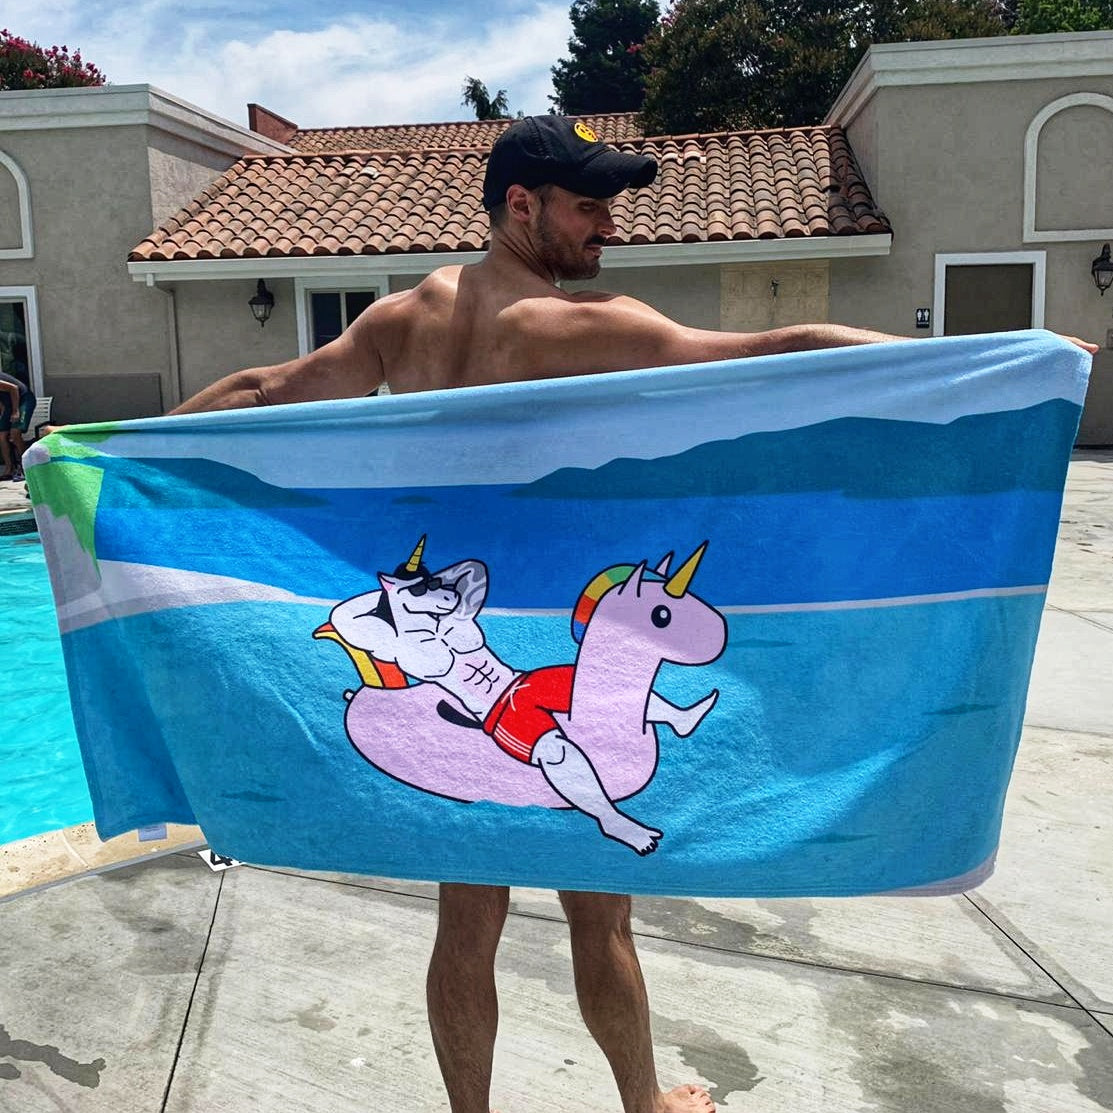 Are you ready for a unicorn pool day?